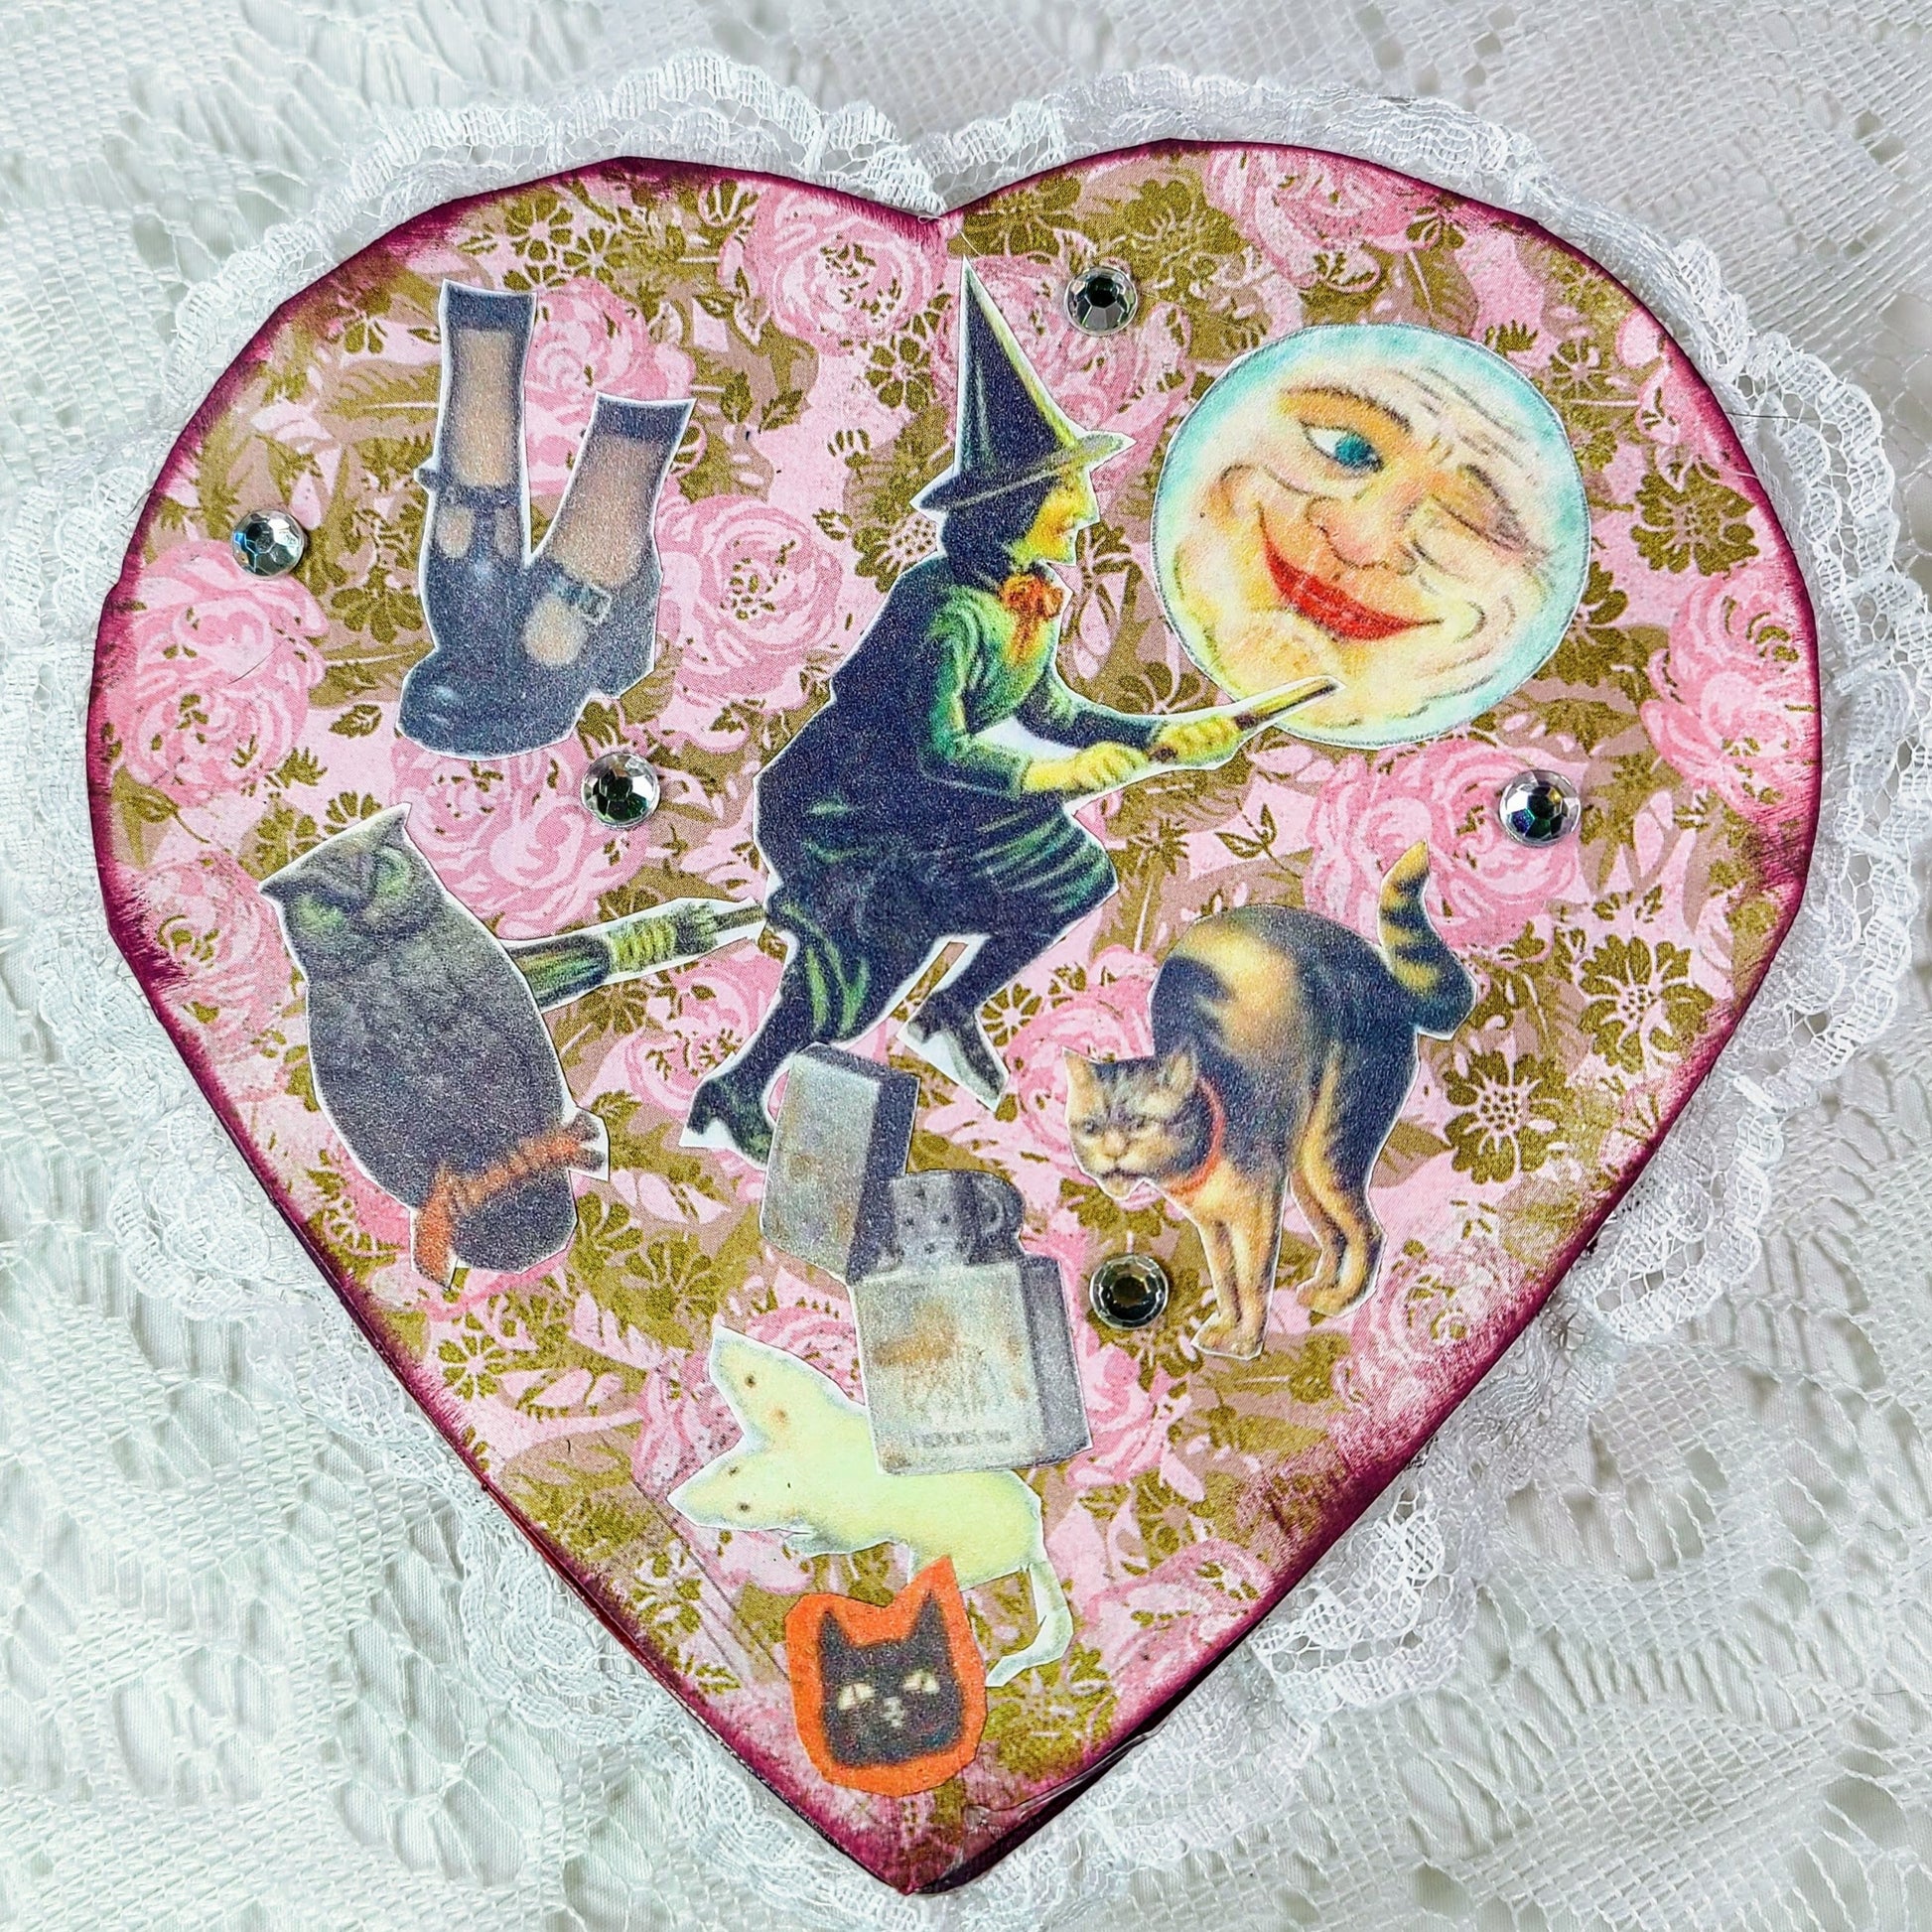 Unique Flying Moon Witch Collage Mixed Media Heart Shaped Trinket Box ~ Love Magick ~ Filled with Goodies ~ OOAK Box plus Mini Love Candle, Spell Jar, Fairy Bell and Crystals ~ Valentine's Day Gift